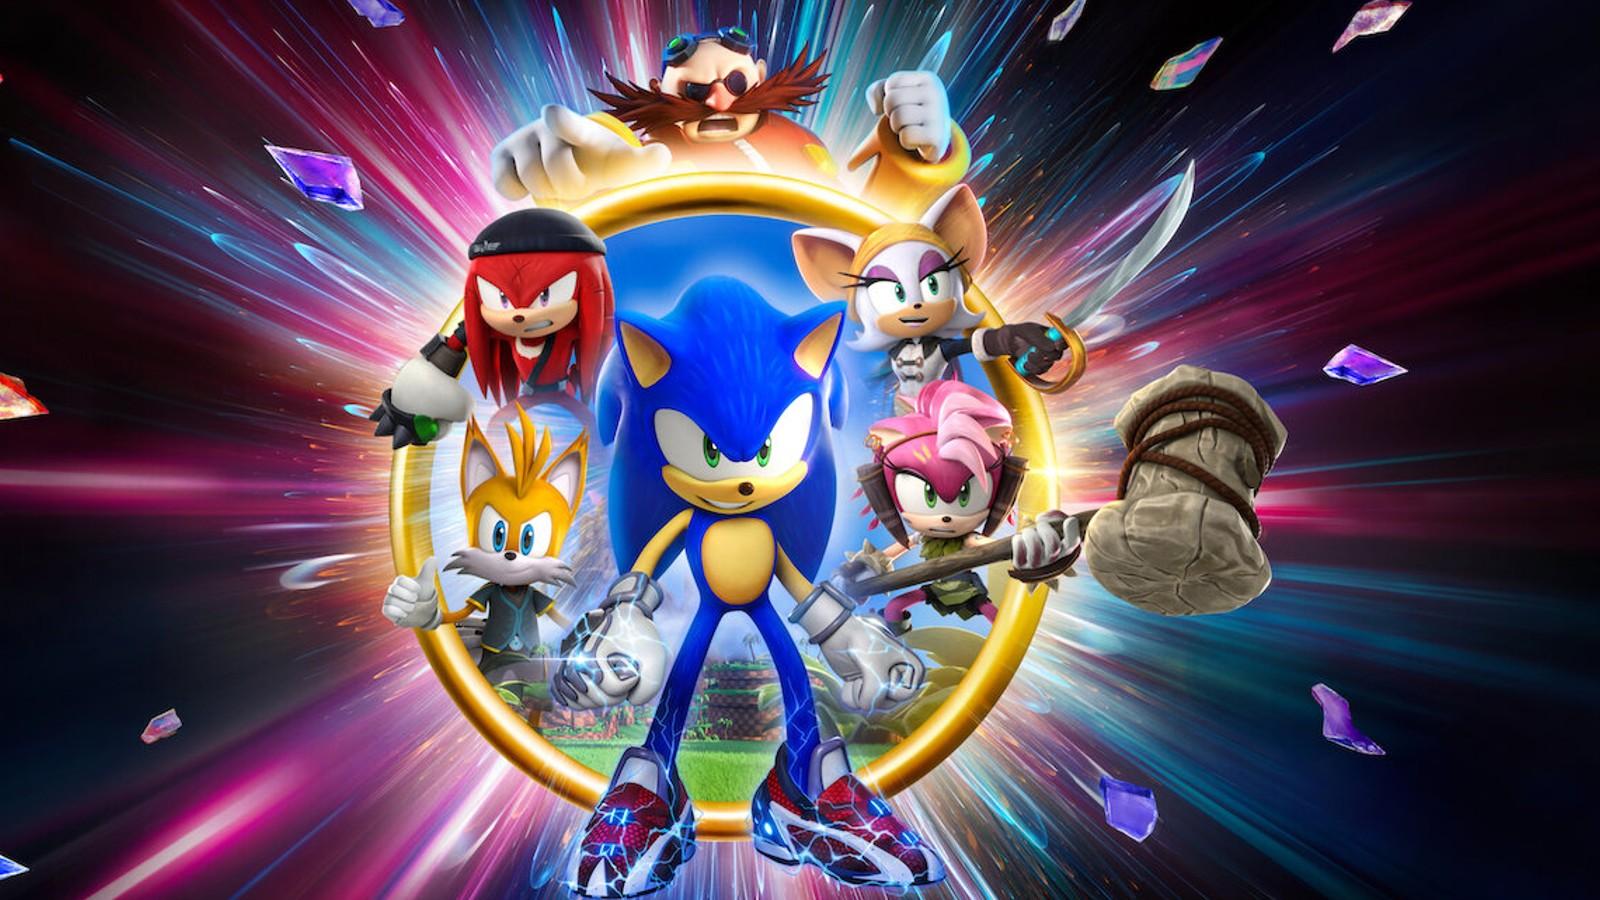 The Netflix Series, SONIC PRIME, is a Family-Friendly Hit